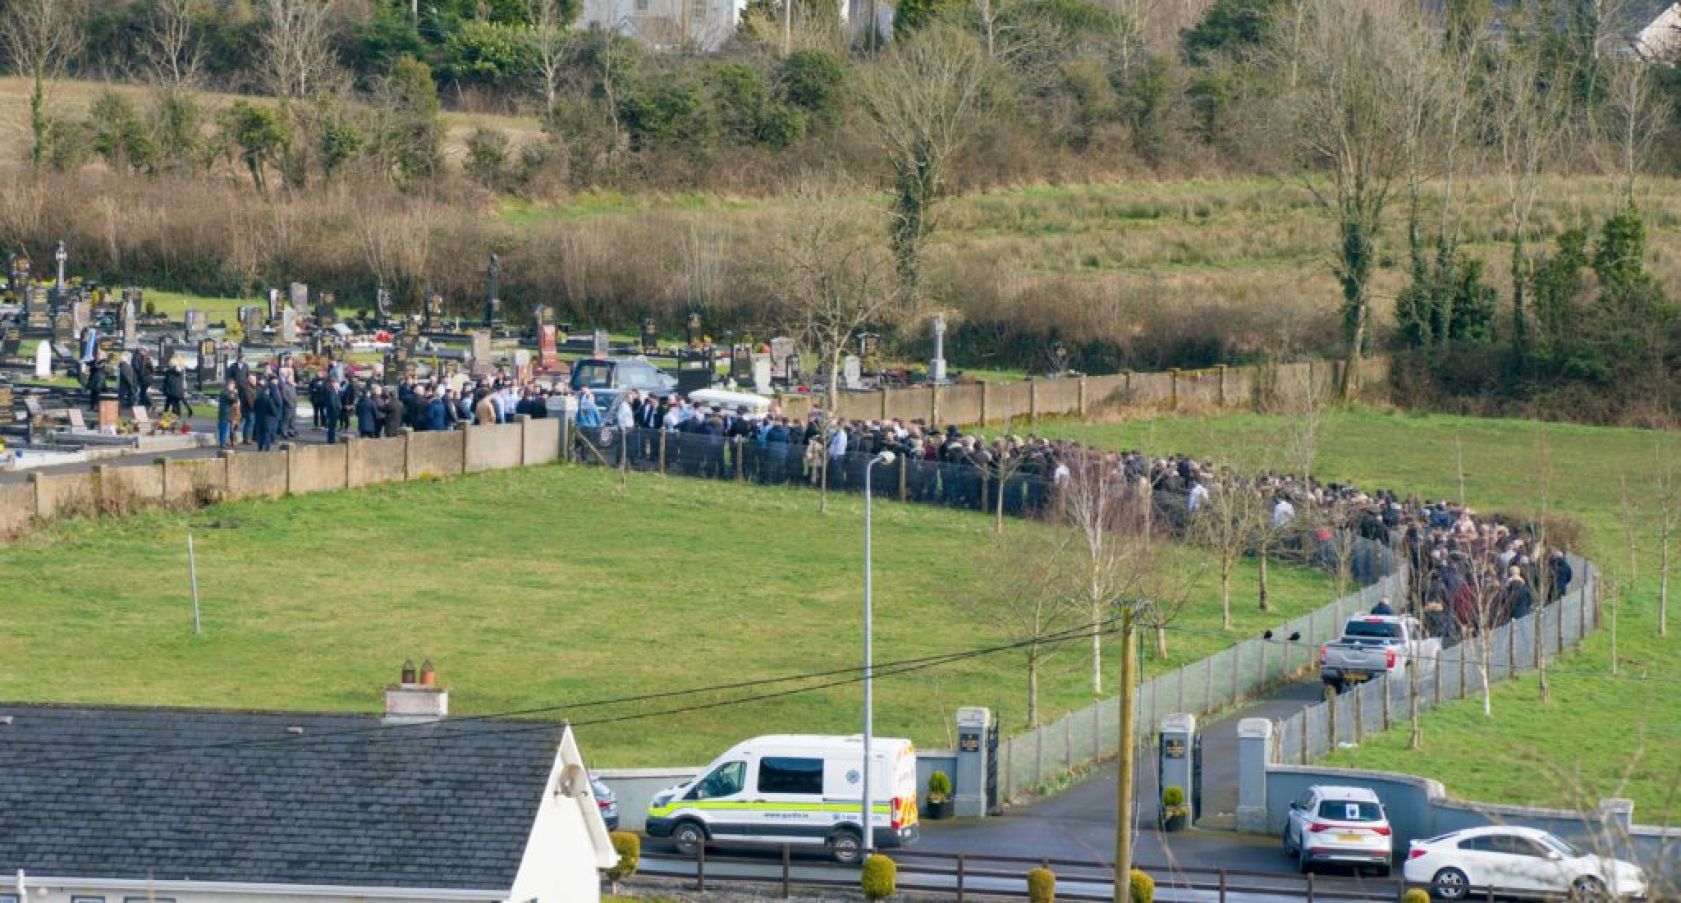 300 Mourners Gathered At St Mary's Cemetery In Carrick-On-Shannon.